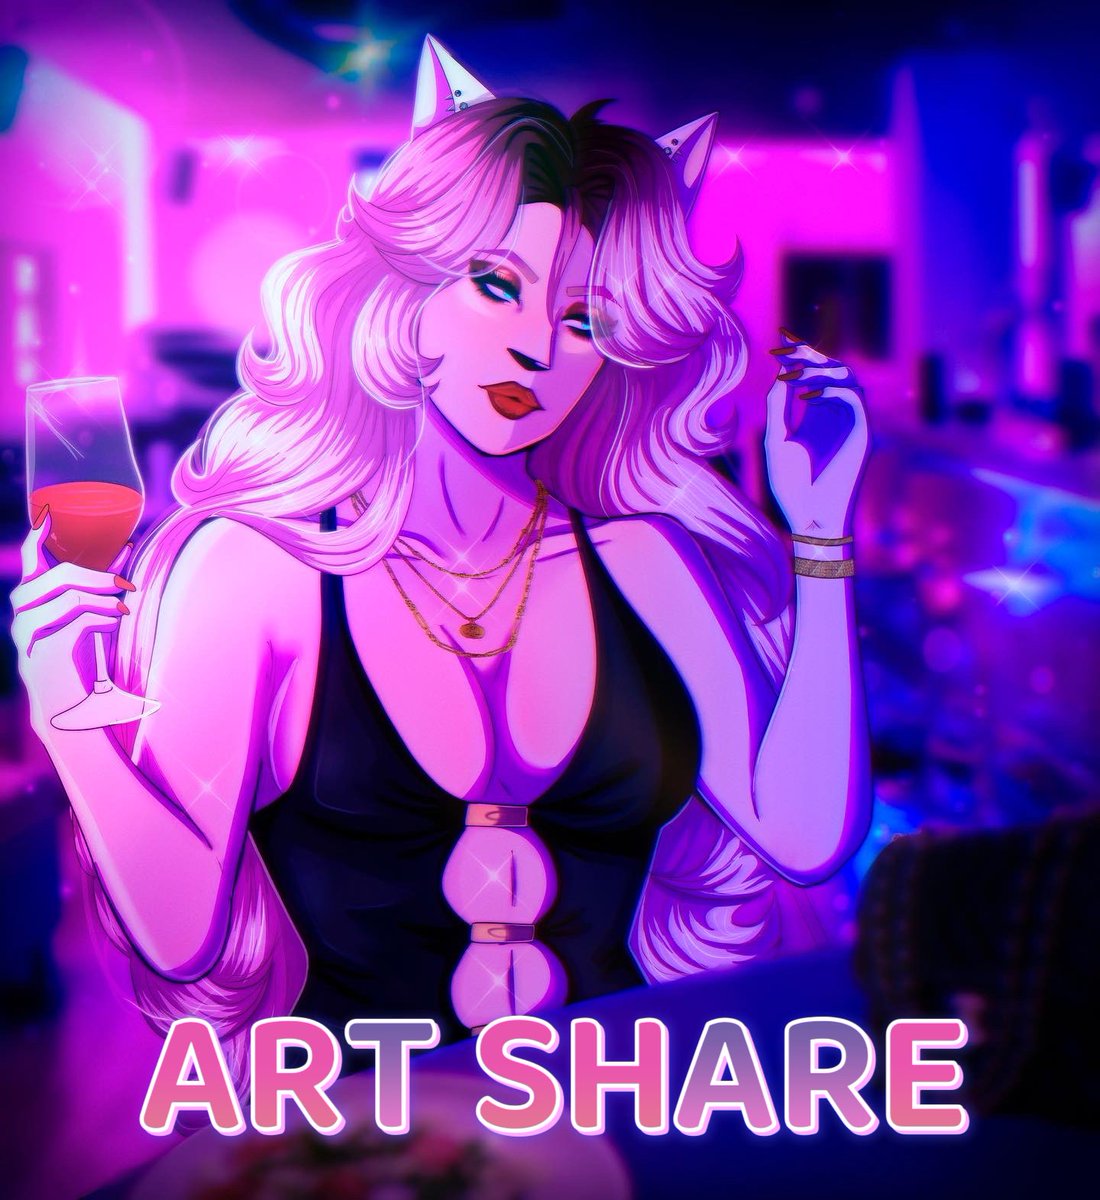 Friday #artshare 💕 Show your art! 💕 Share this post 💕 Keep is SFW 💕 No A*I or N*FT’s 💕i’ll RT as many as possible 💕 Support each other in the comments 💕 Follow me if you’d like!